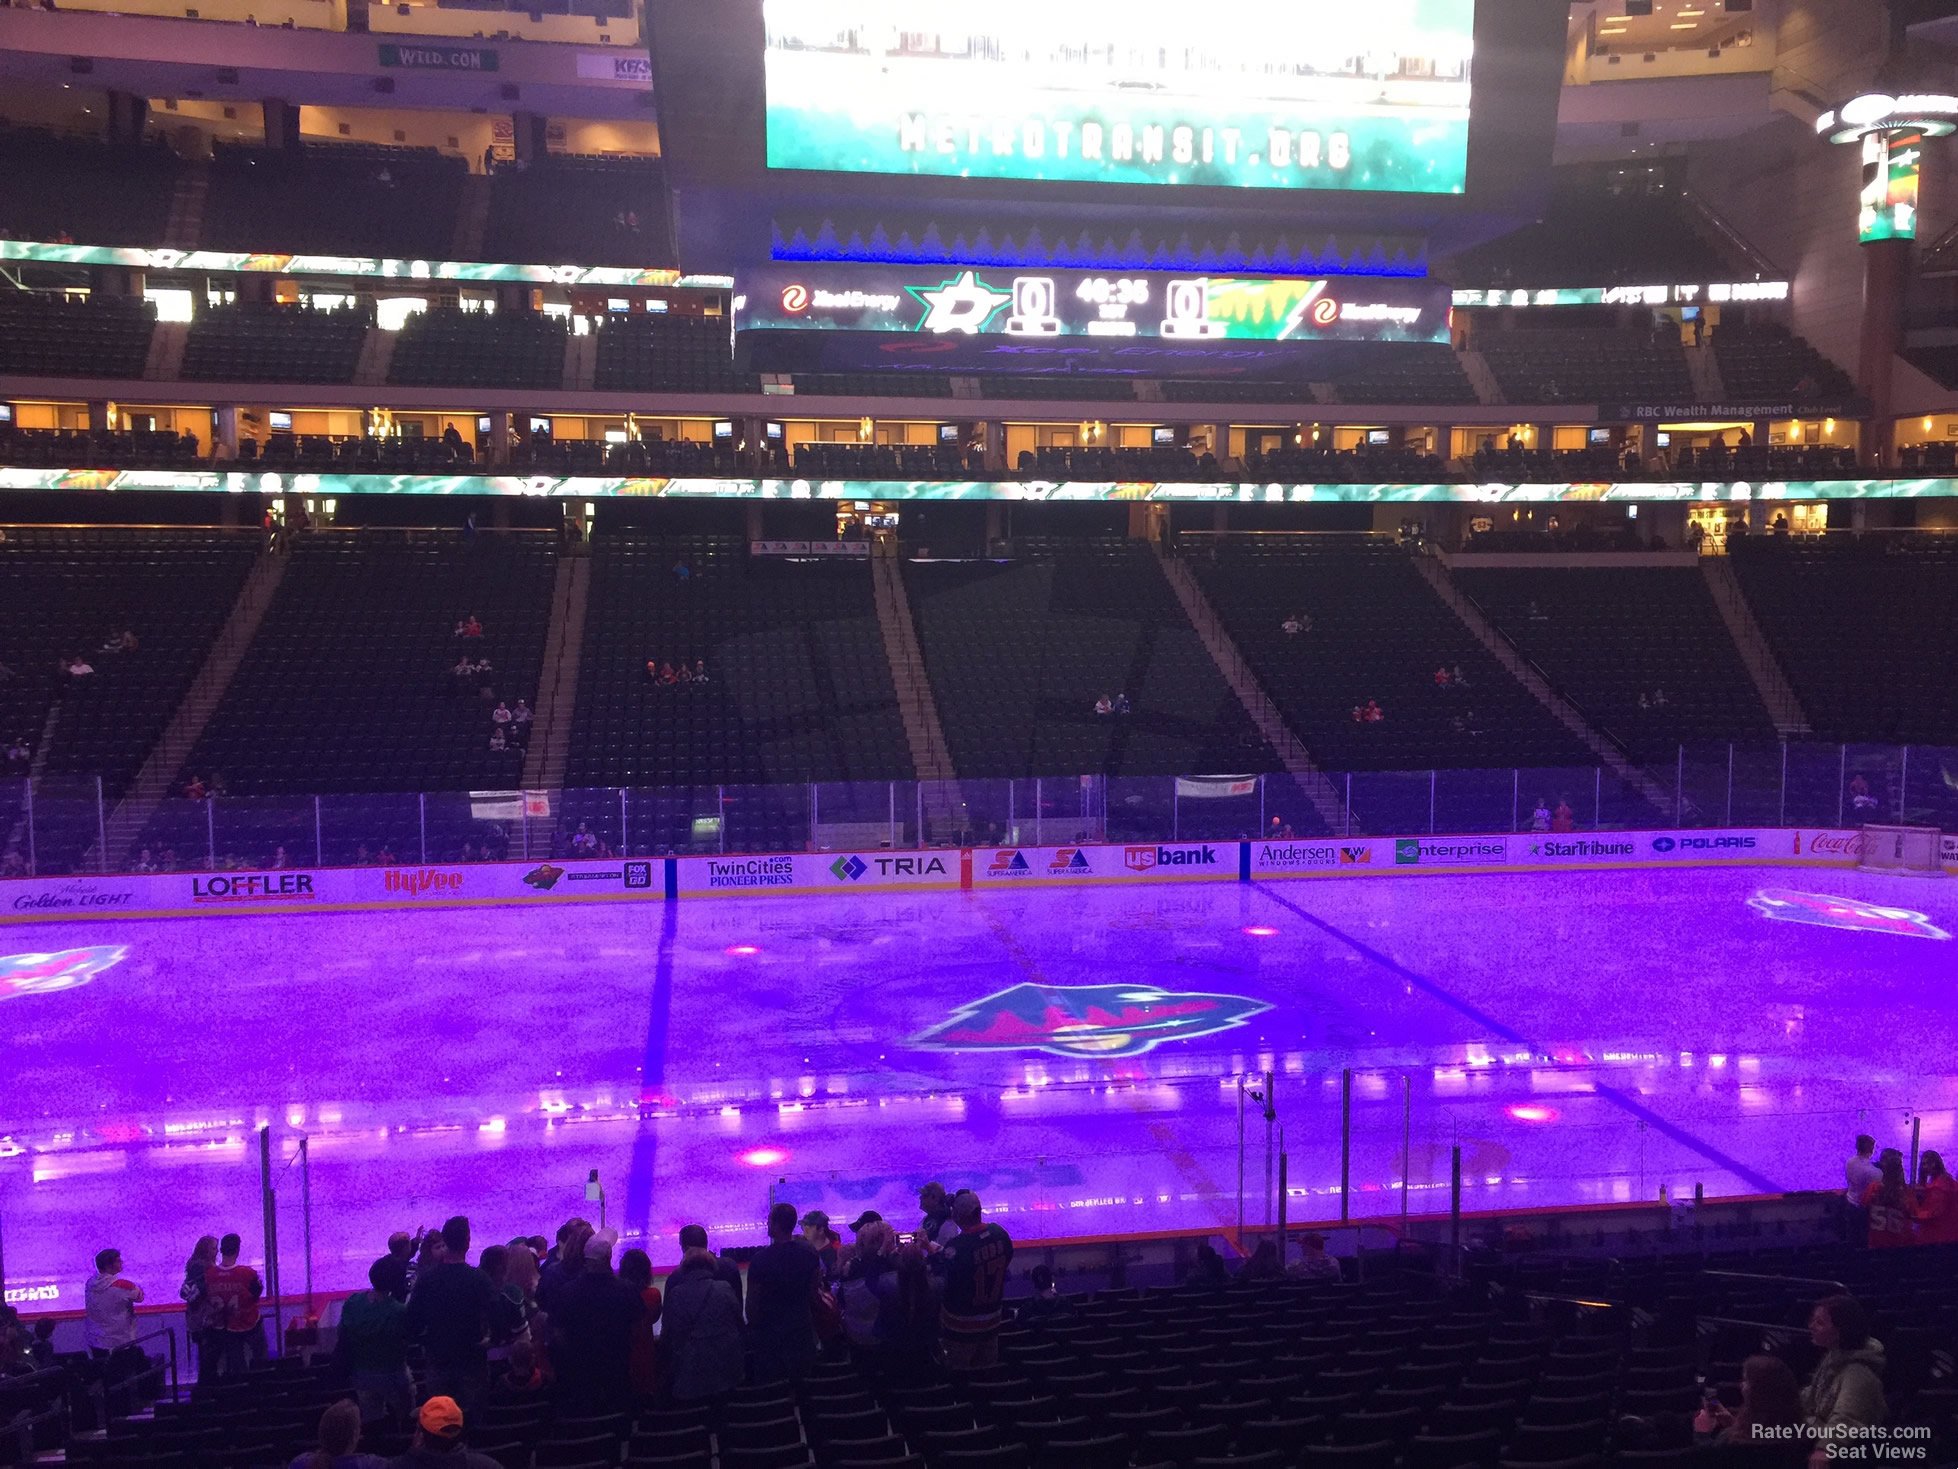 section 117, row 24 seat view  for hockey - xcel energy center